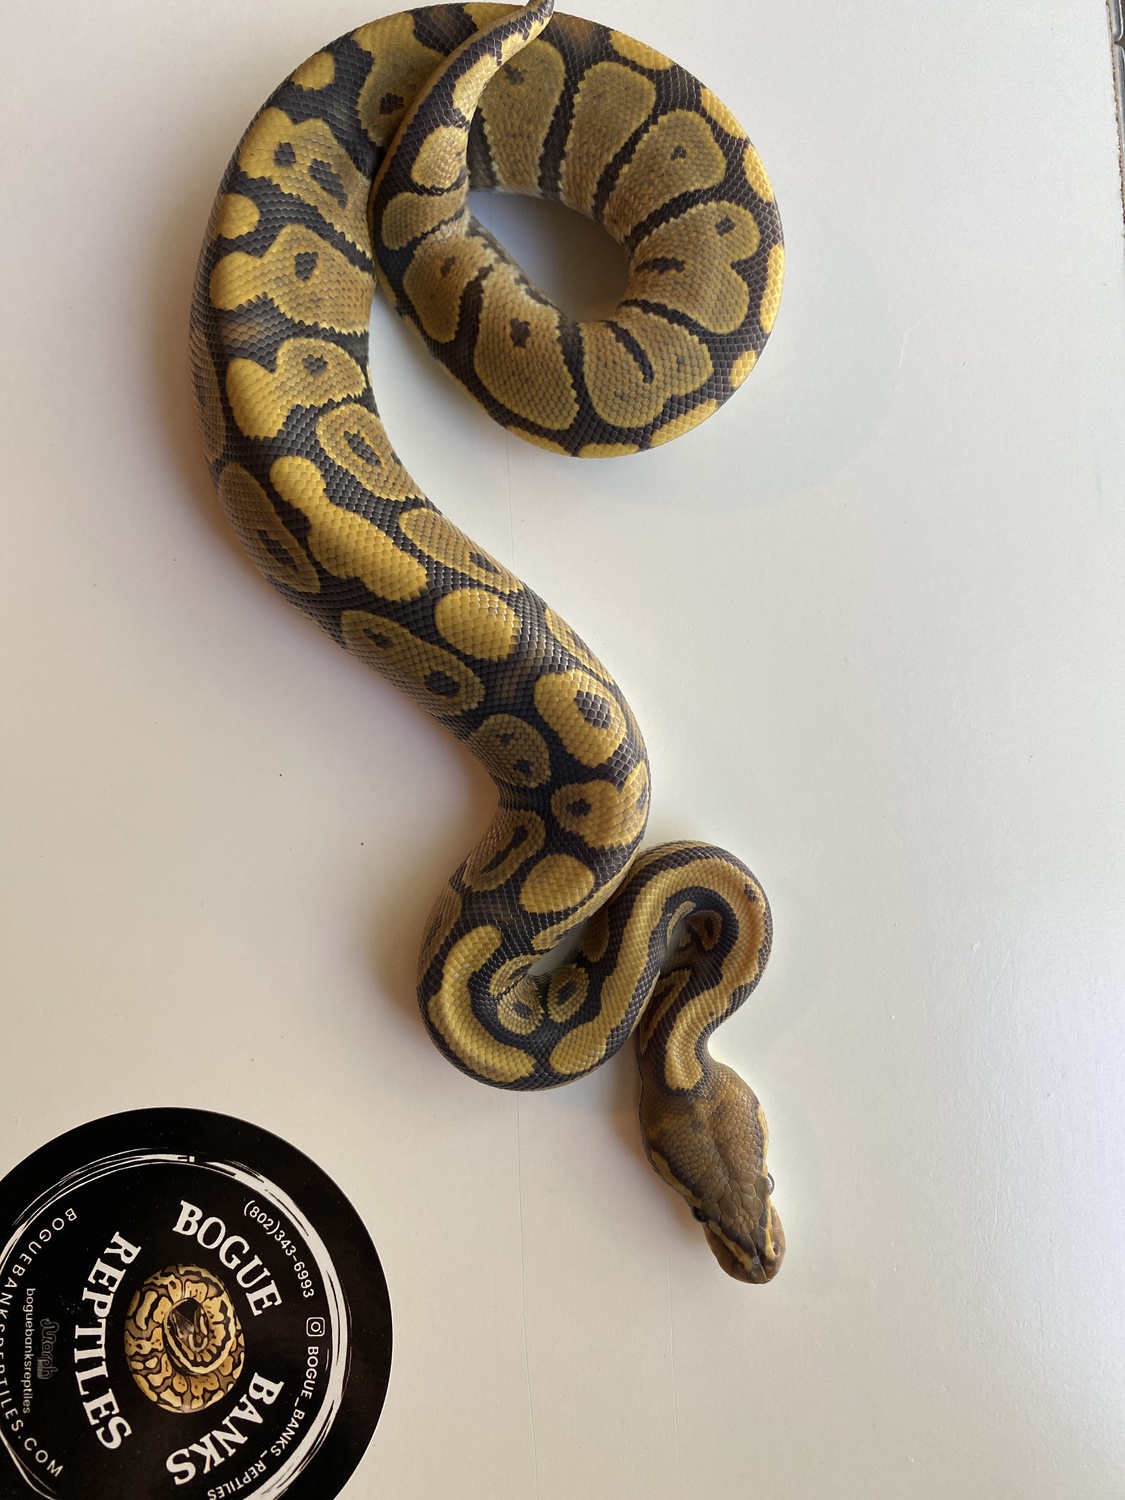 Orange Ghost Ball Python by Bogue Banks Reptiles